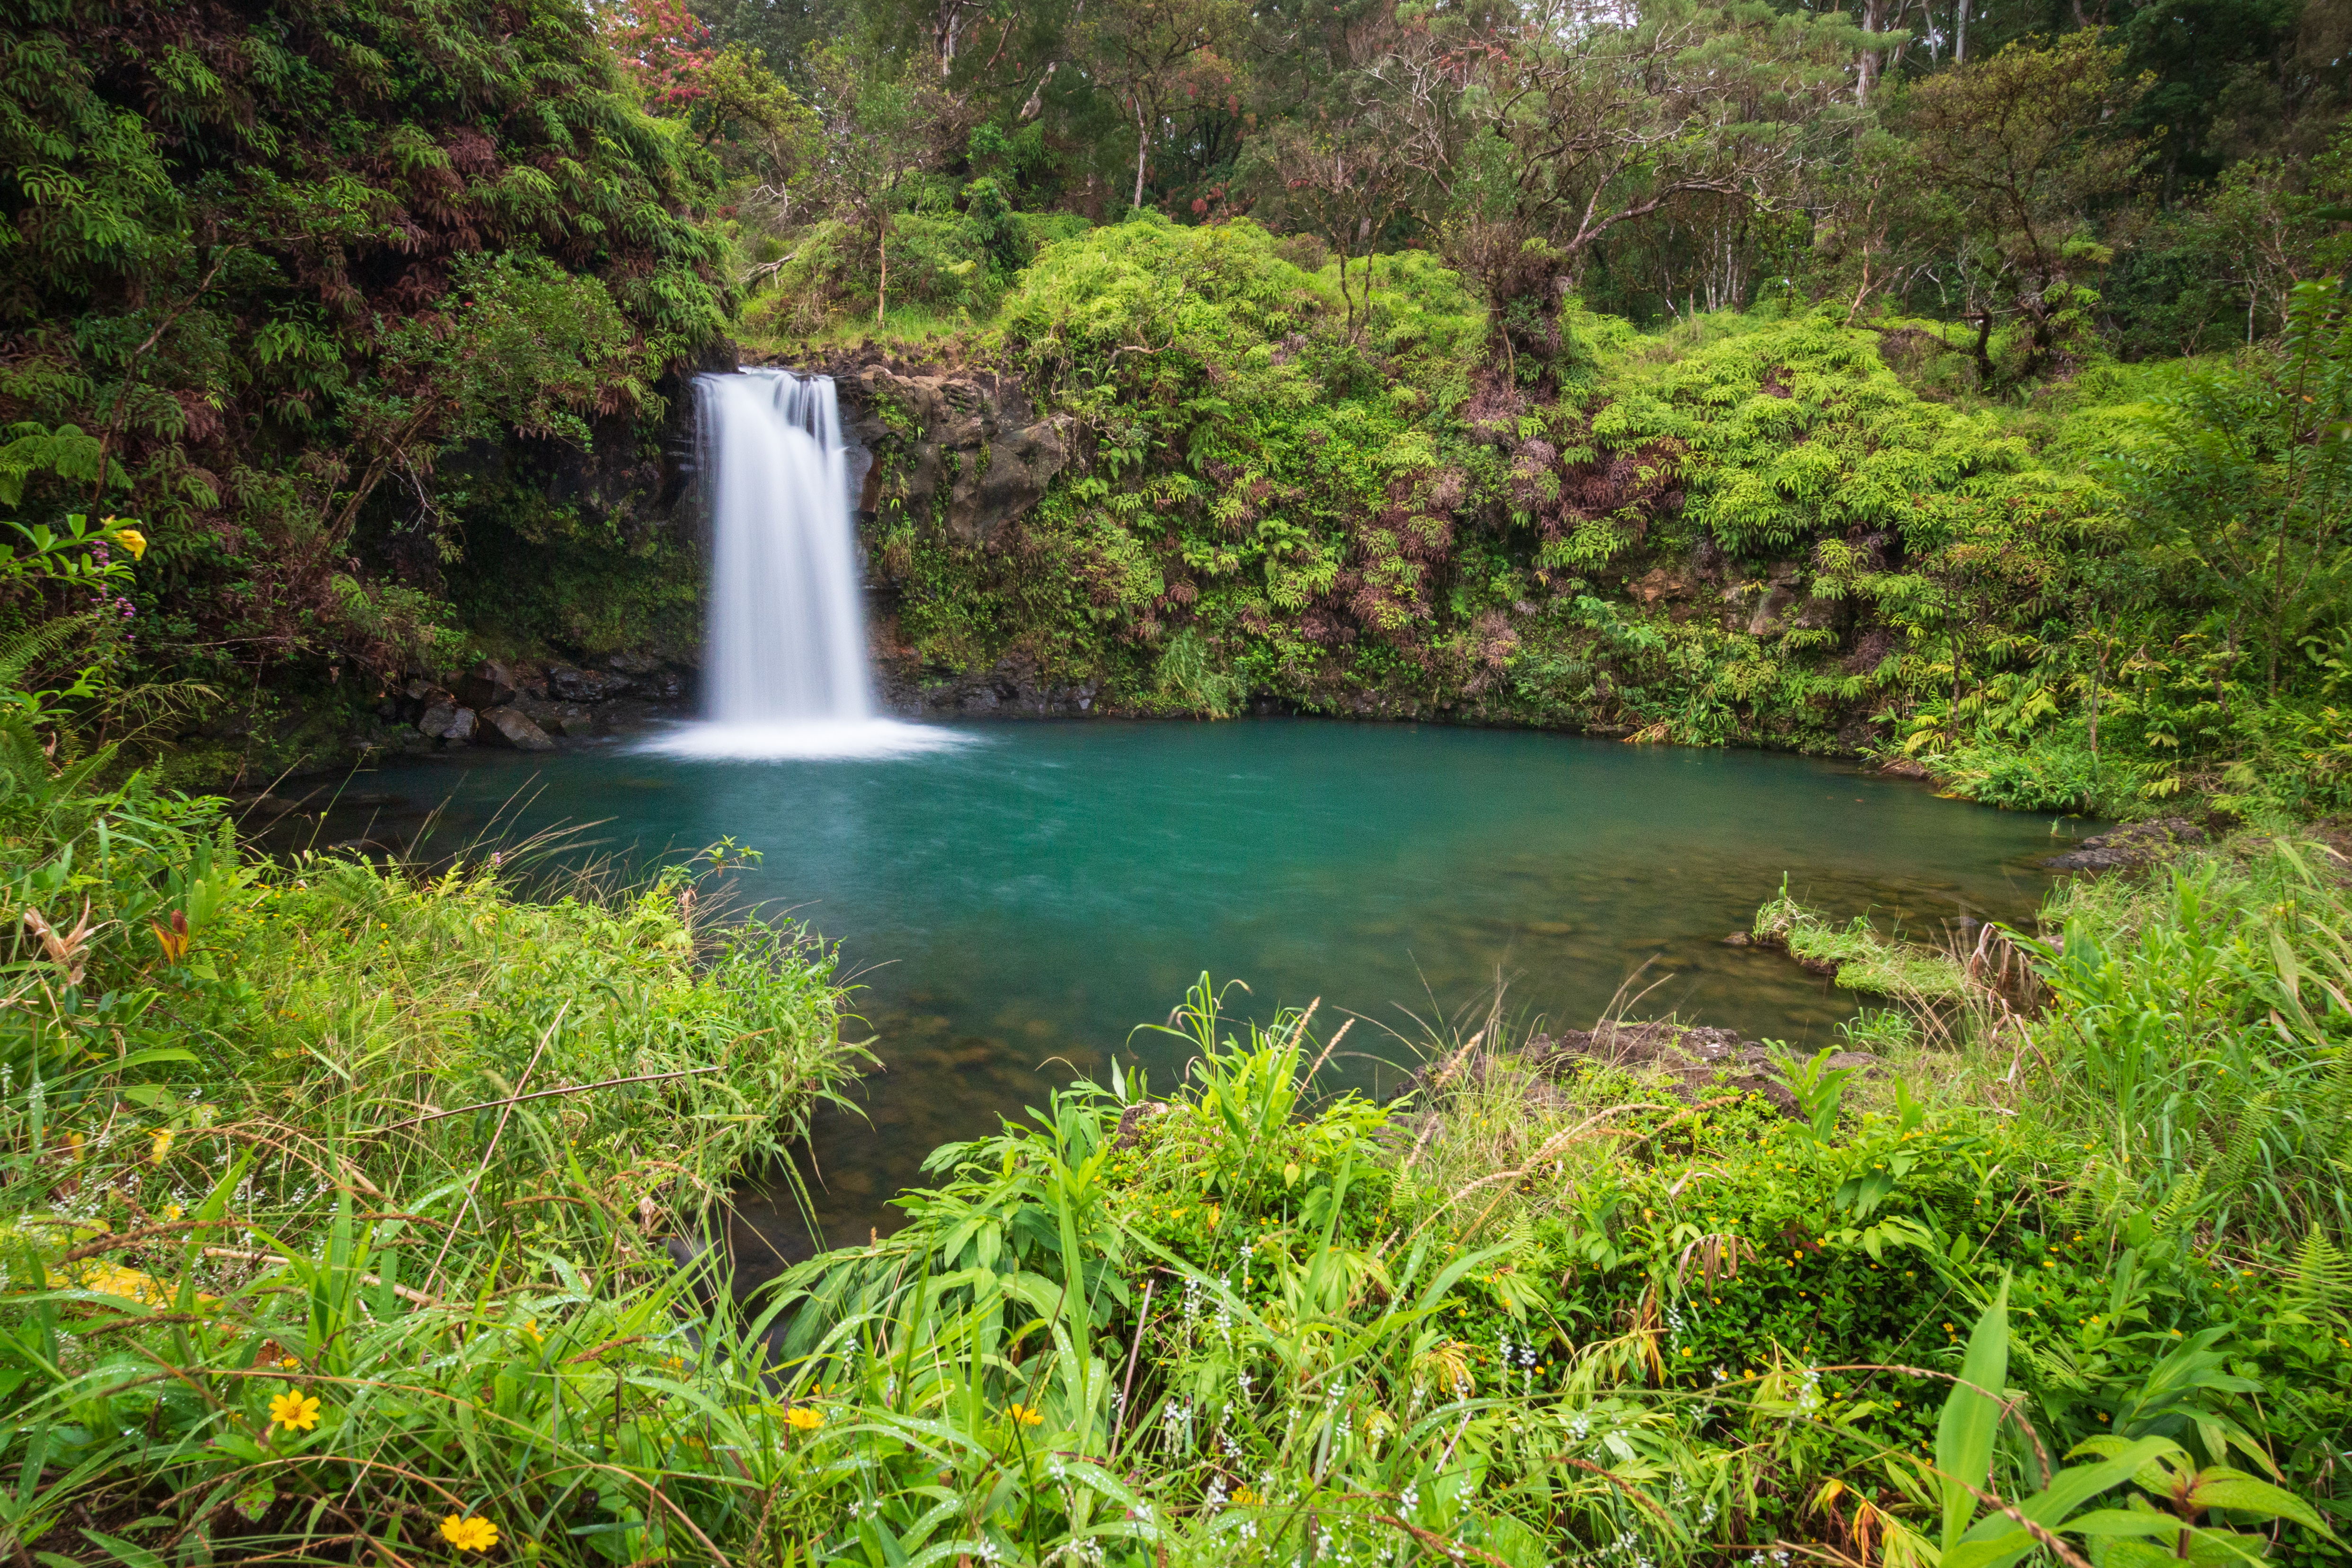 Explore the Amazing Road to Hana with Your Family Using My Helpful Guide - Pua'a Ka'a Falls on the Road to Hana at Mile Marker 22